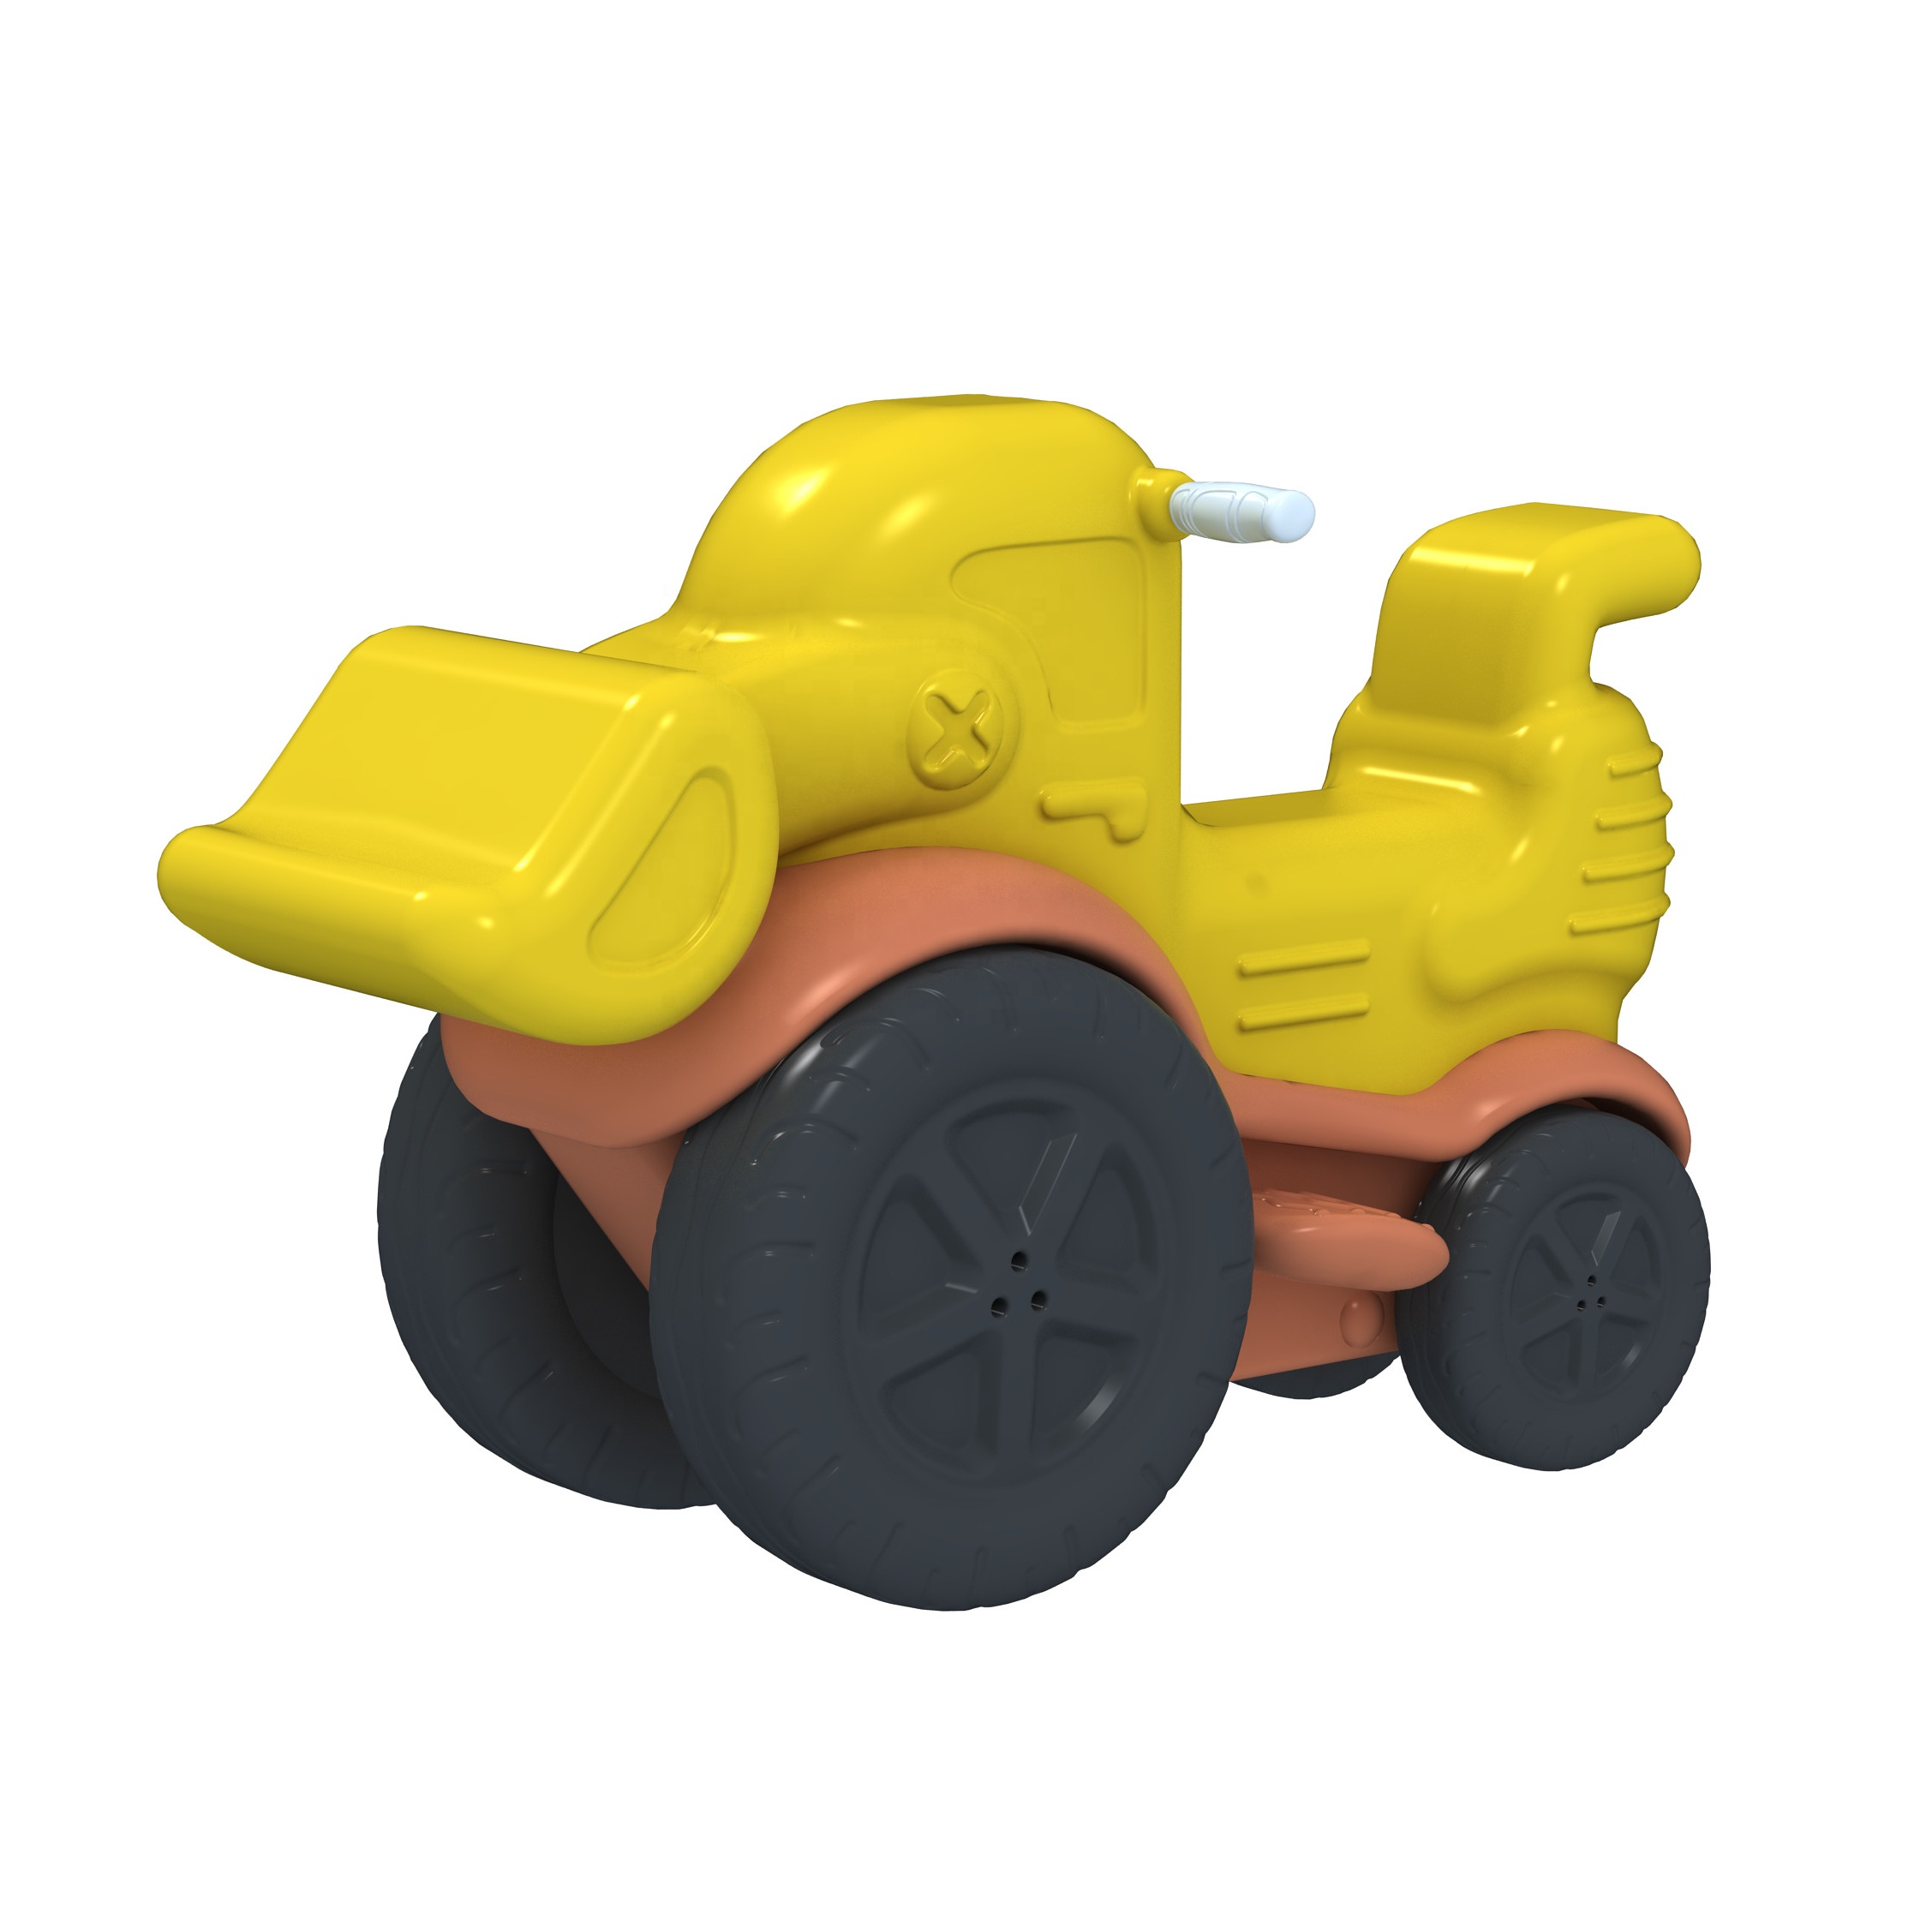 Good Quality Playgrounds For Indoor And Outdoor - IDO outdoor playground tank kids outdoor small yellow toy car interesting outdoor playground toy car – IDO Amusement